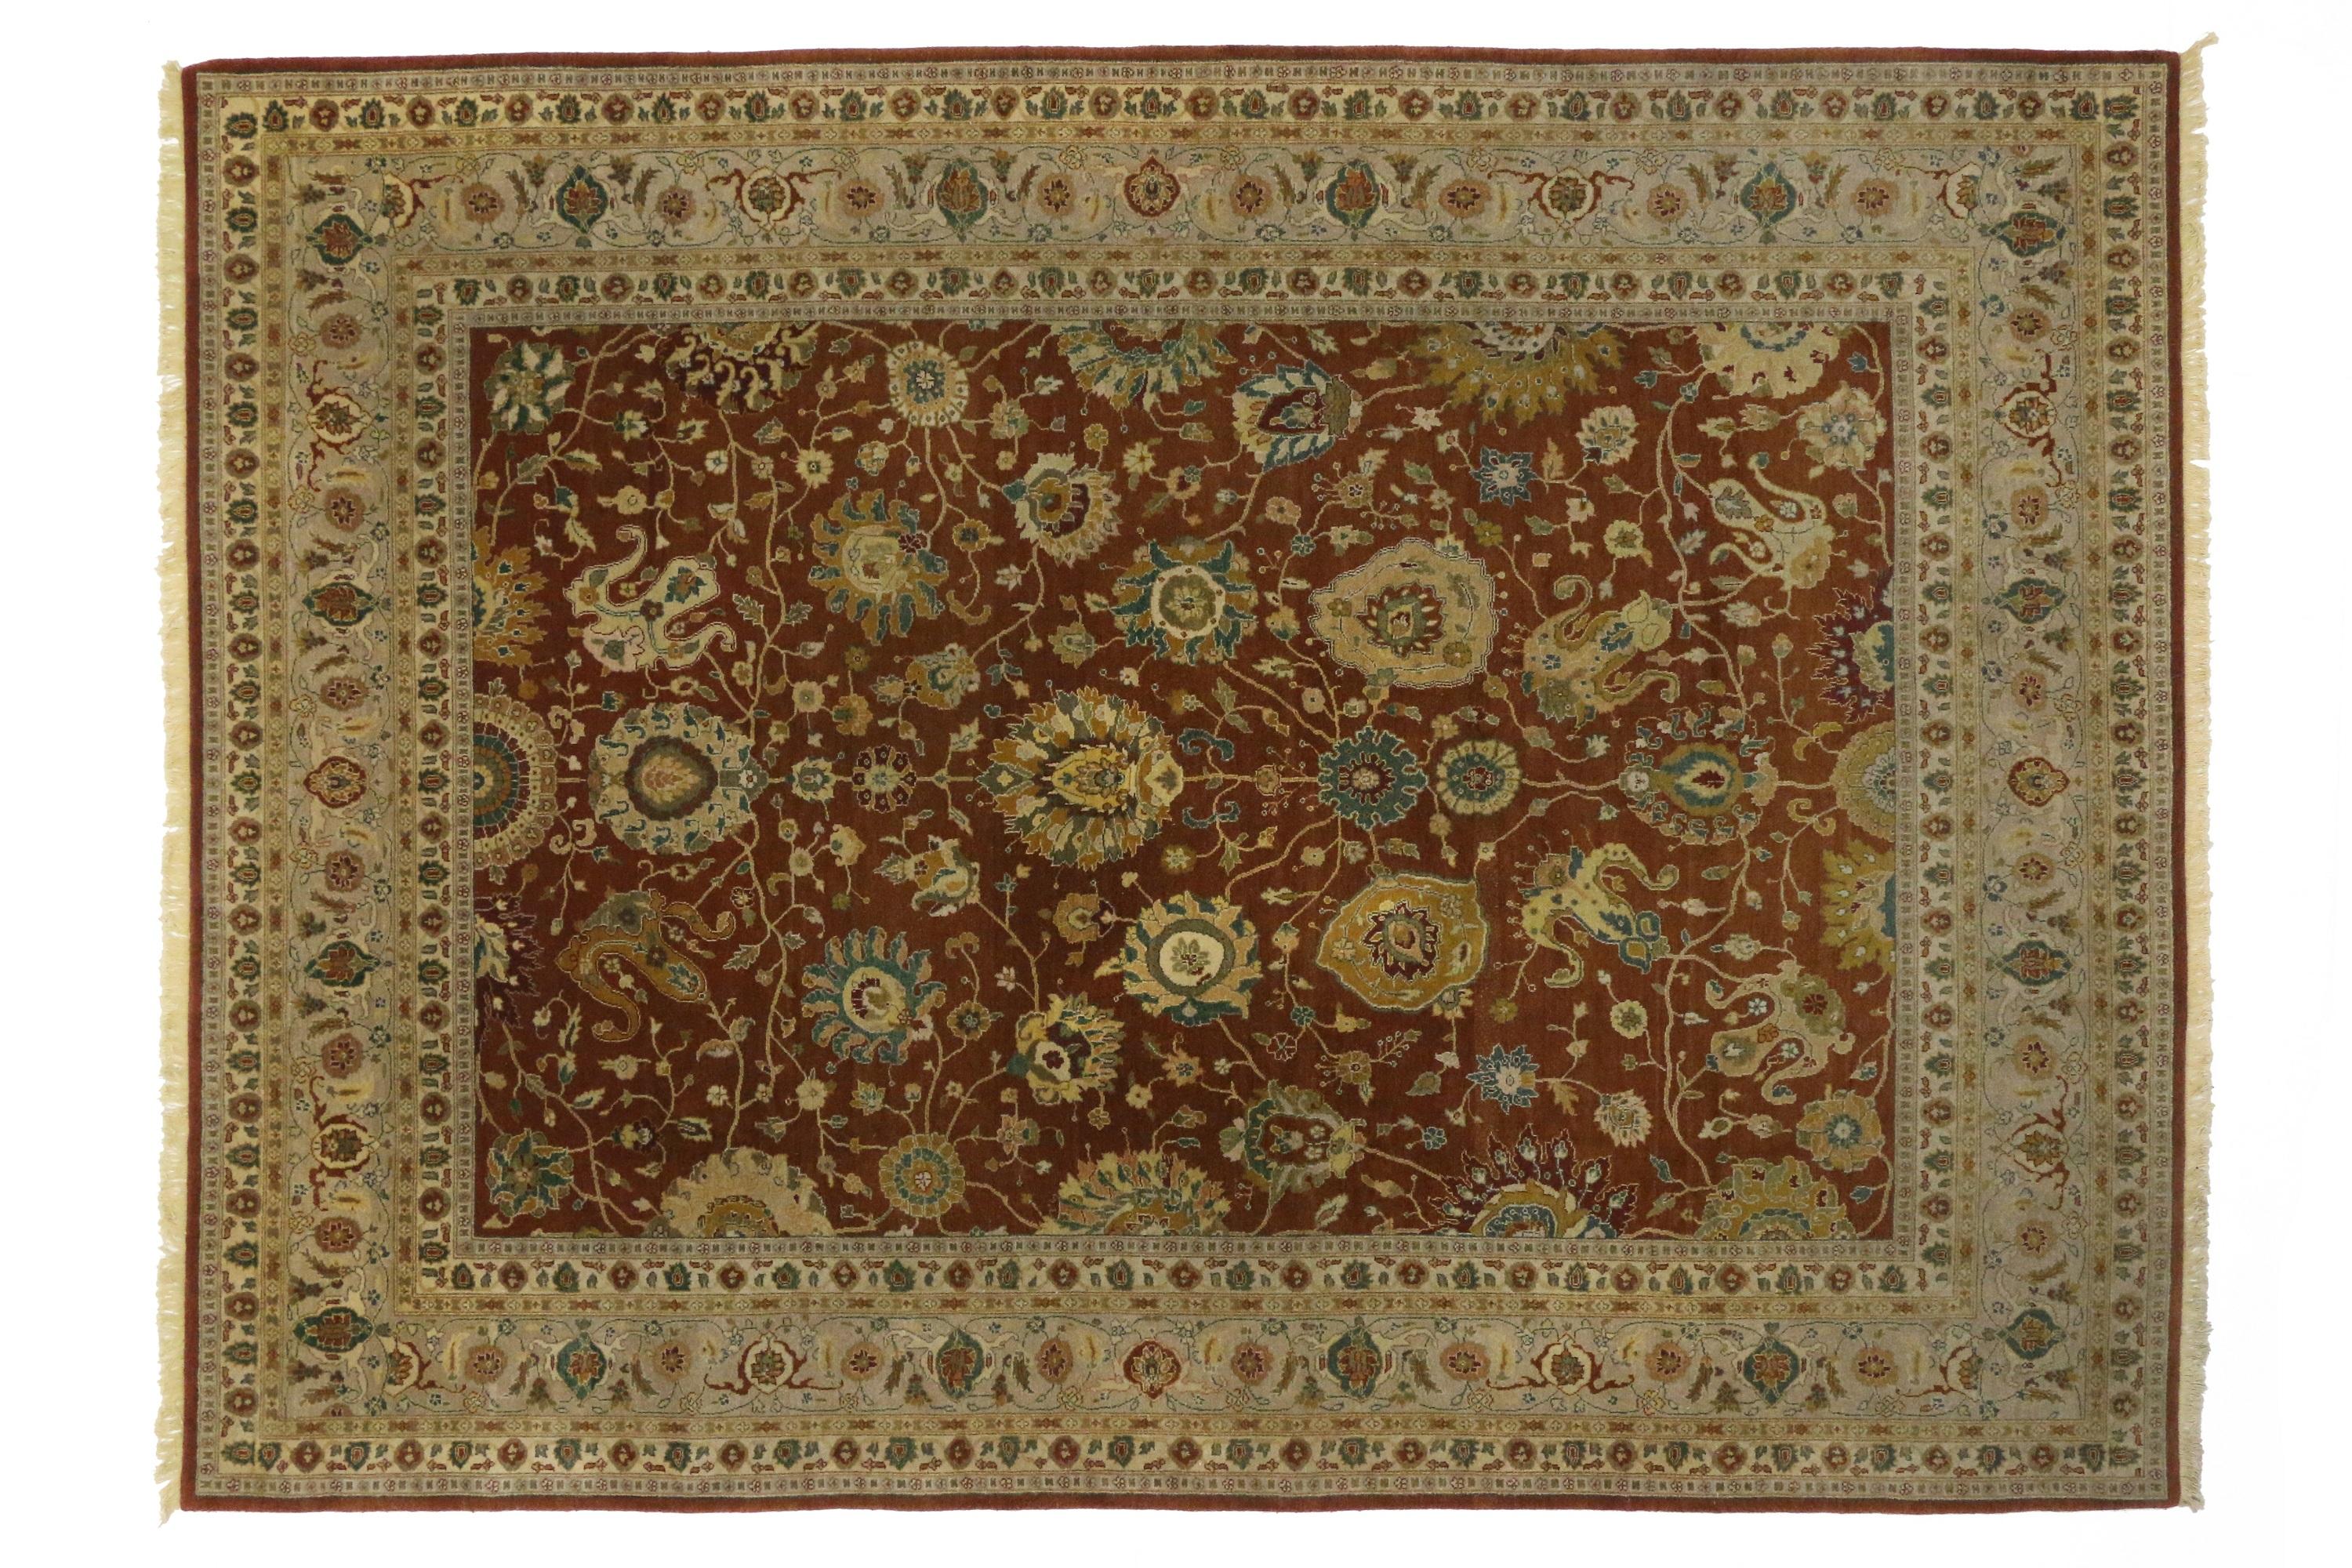 76709, vintage Indian rug with traditional style and all-over floral design. This opulent traditional style rug features a warm spice colored field blooming with lush, intricate palmettes in saffron, muted teal, sand, creamy-beige and mocha.